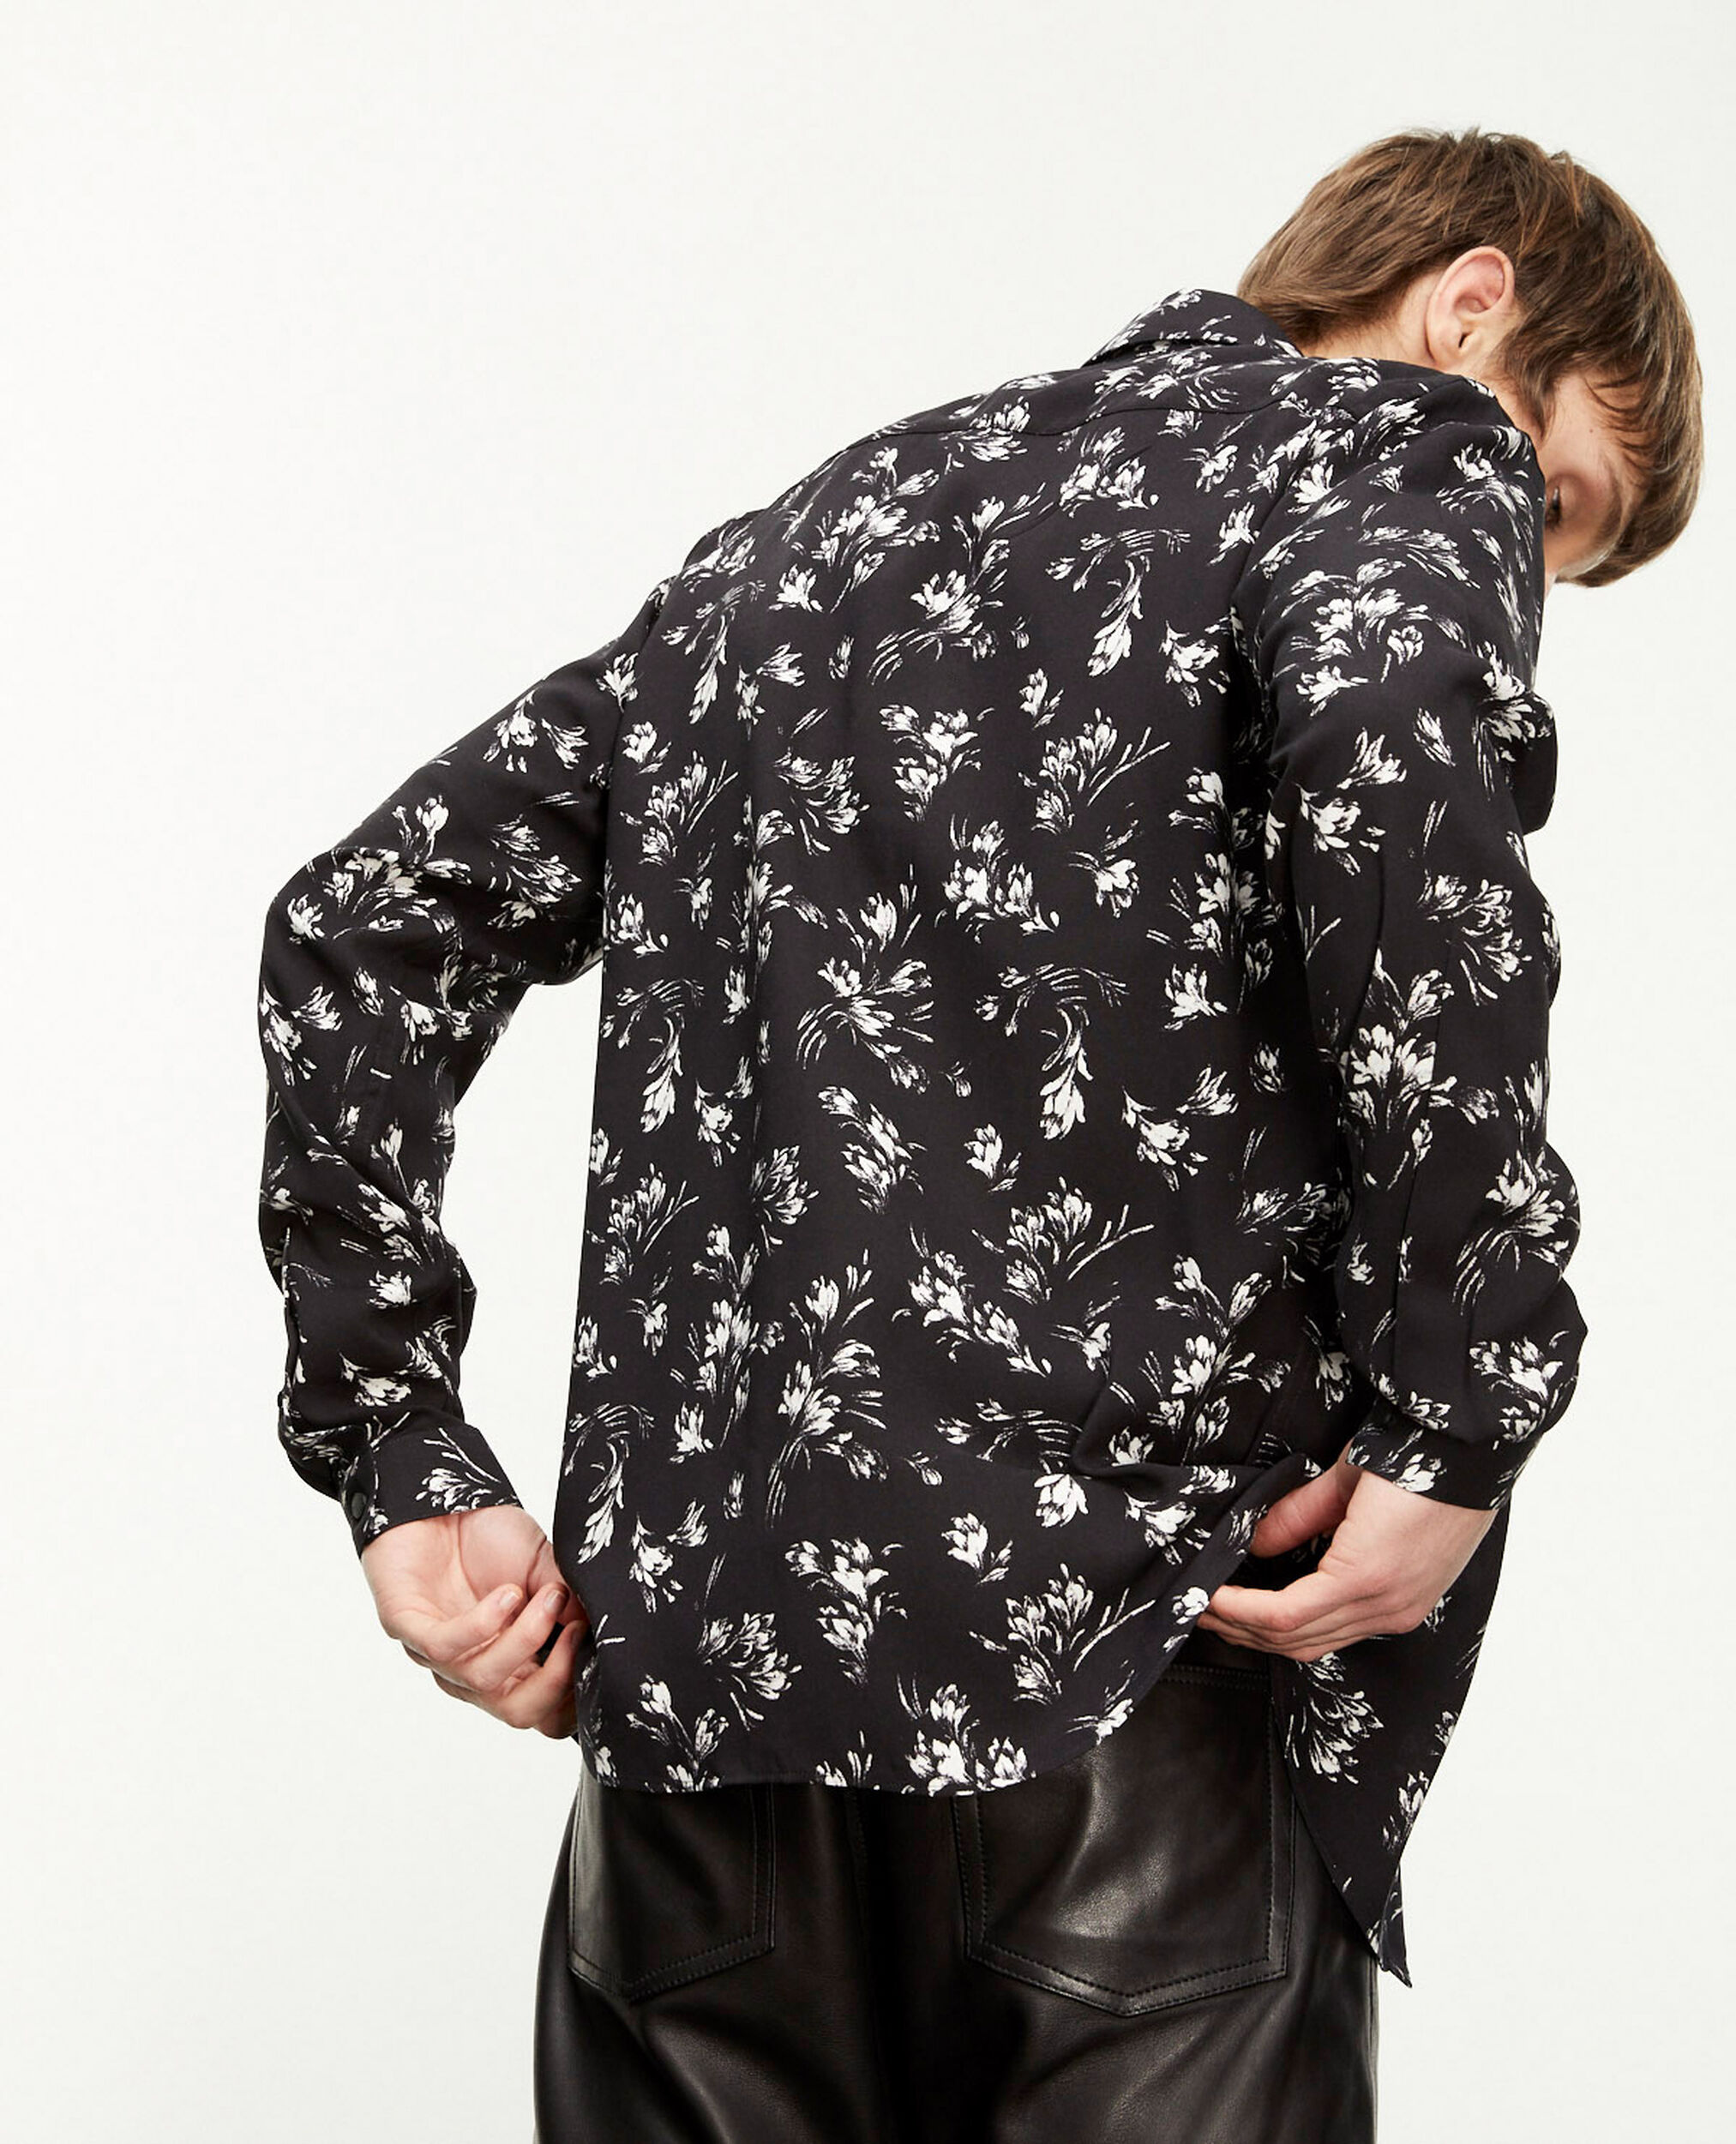 Flowing black and white floral shirt, BLACK WHITE, hi-res image number null